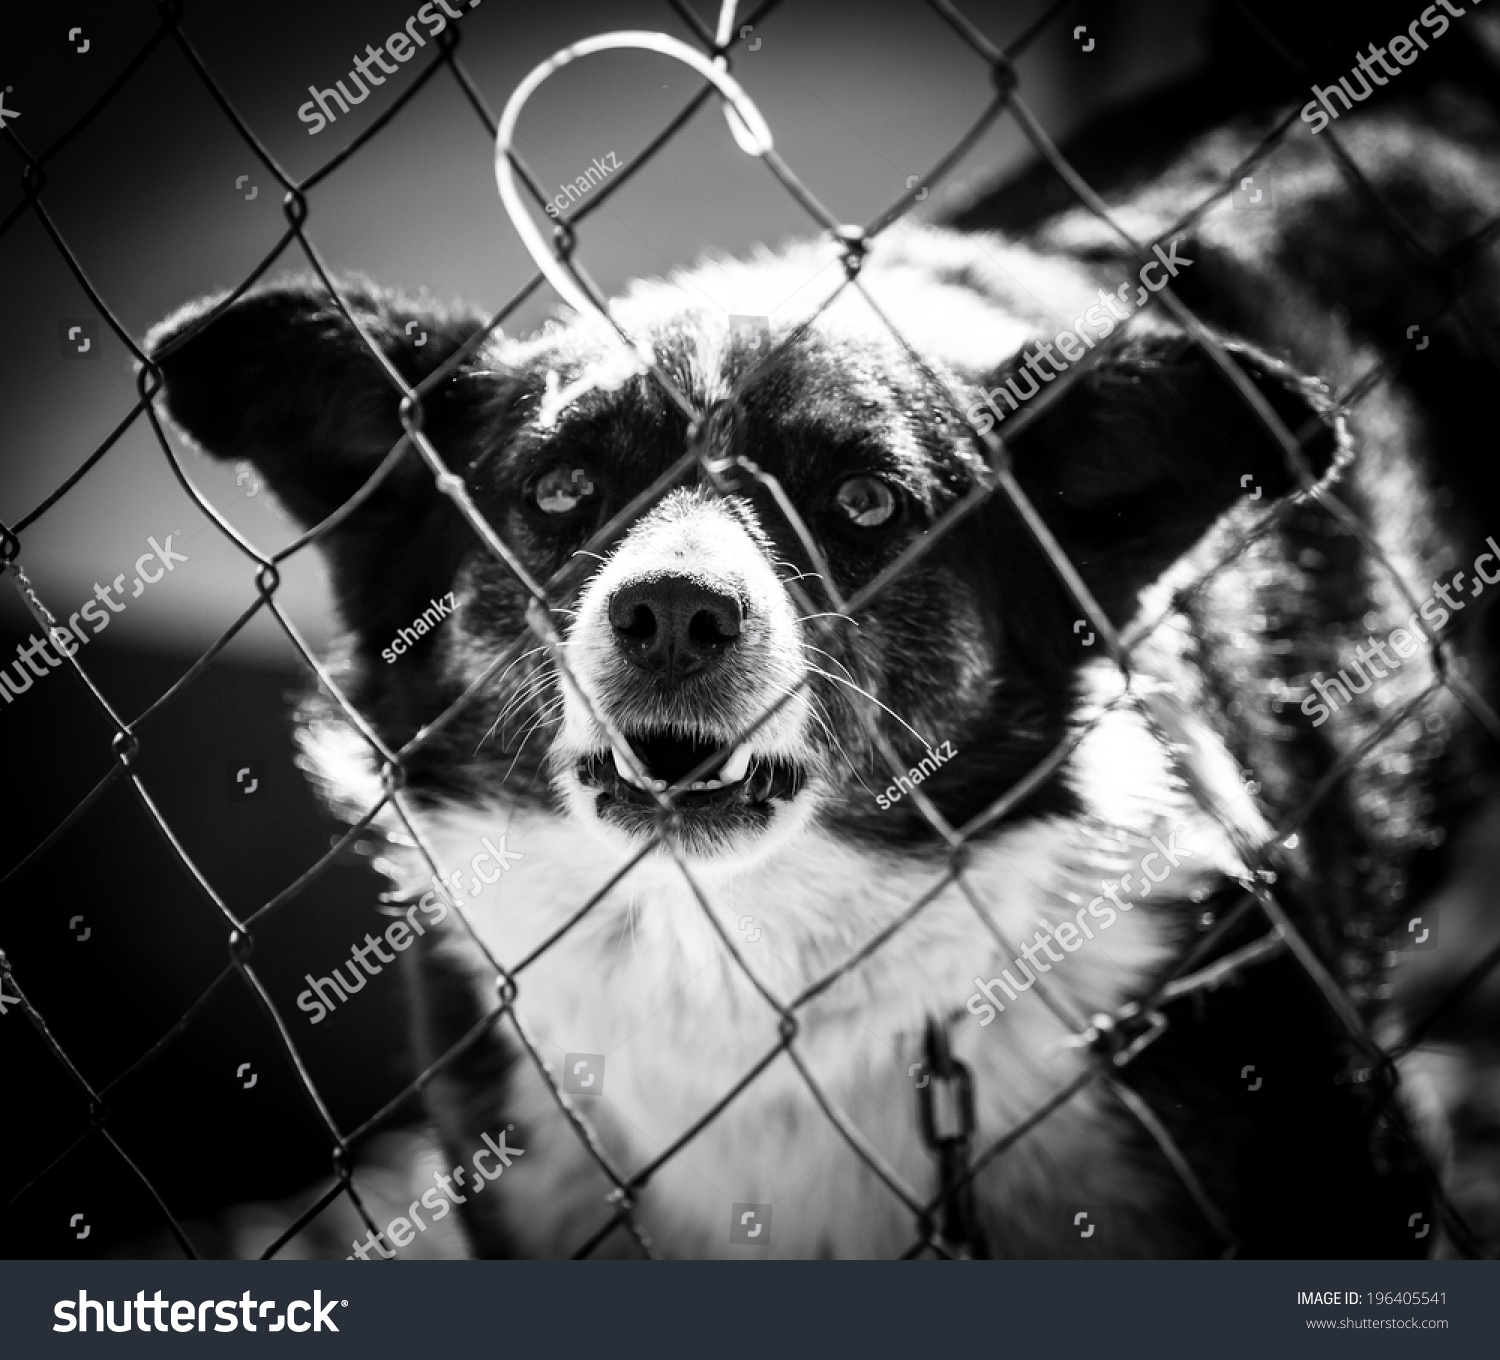 Angry Dog Behind Fence Stock Photo (Edit Now) 196405541